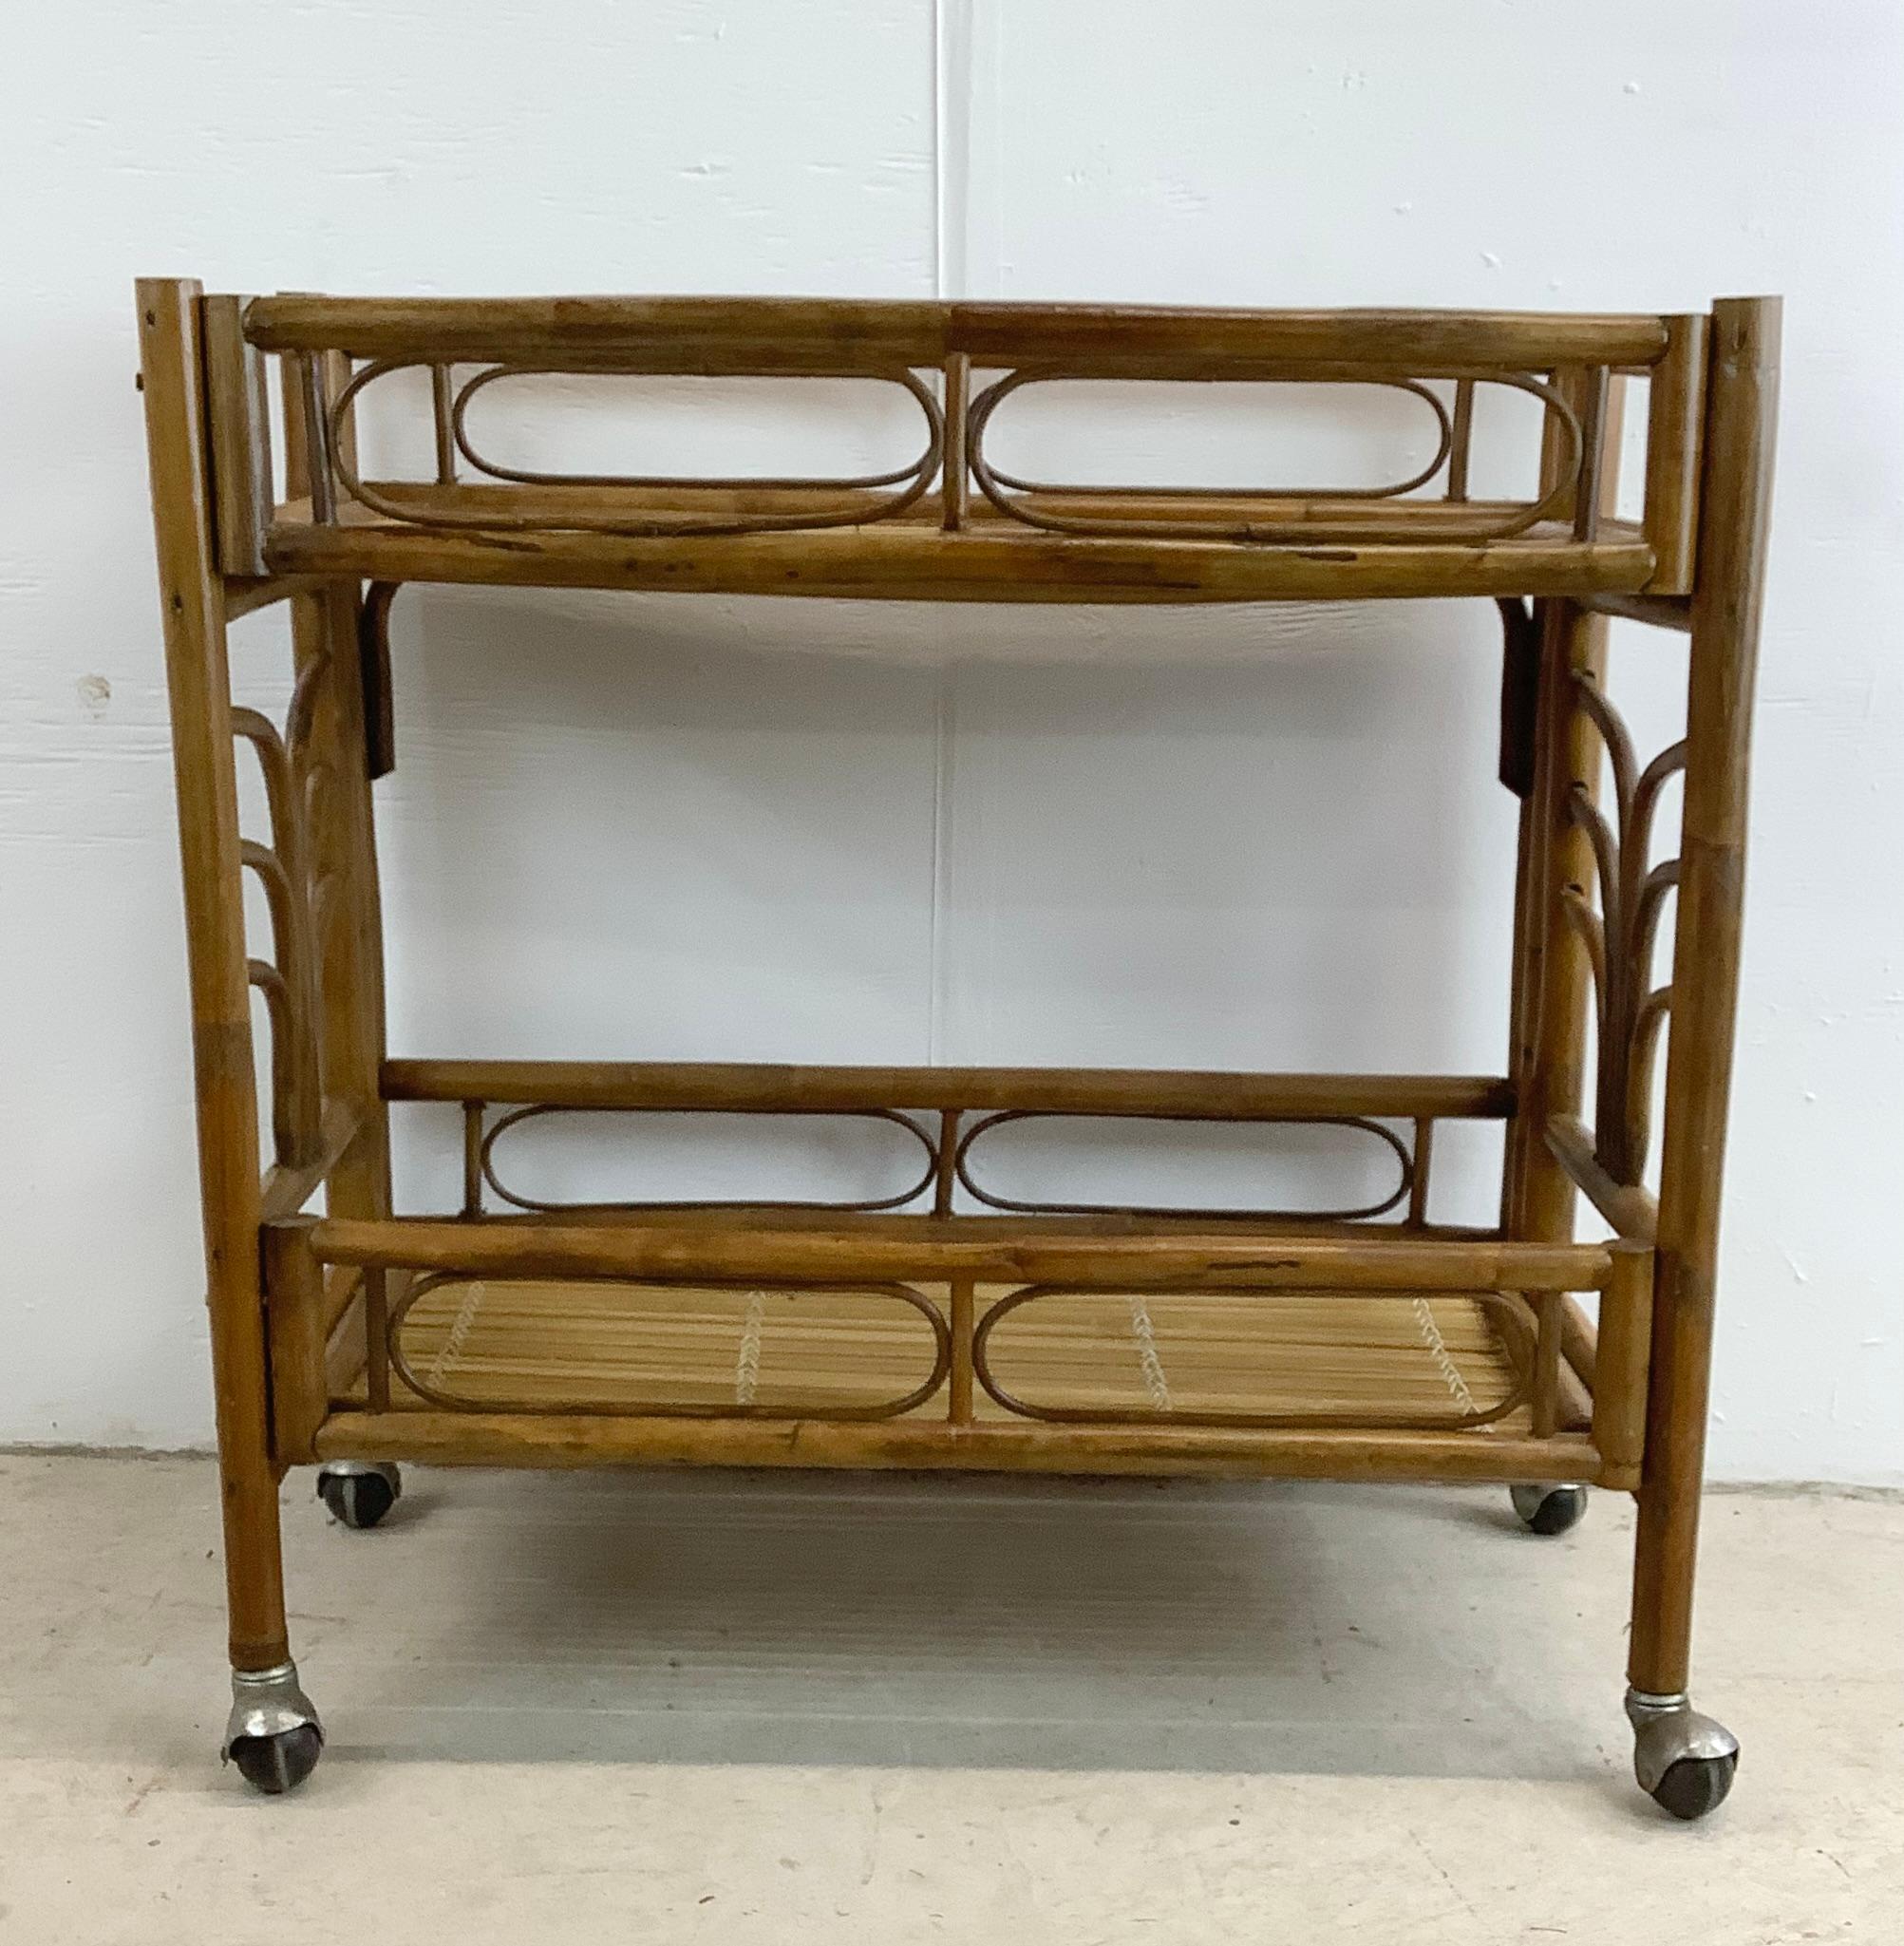 This Vintage Bamboo Bar Car makes a stylish mid-century style piece that adds a touch of elegance and functionality to your home, this remarkable bar cart is a true vintage gem.

Crafted with an eye-catching boho modern style, the bamboo